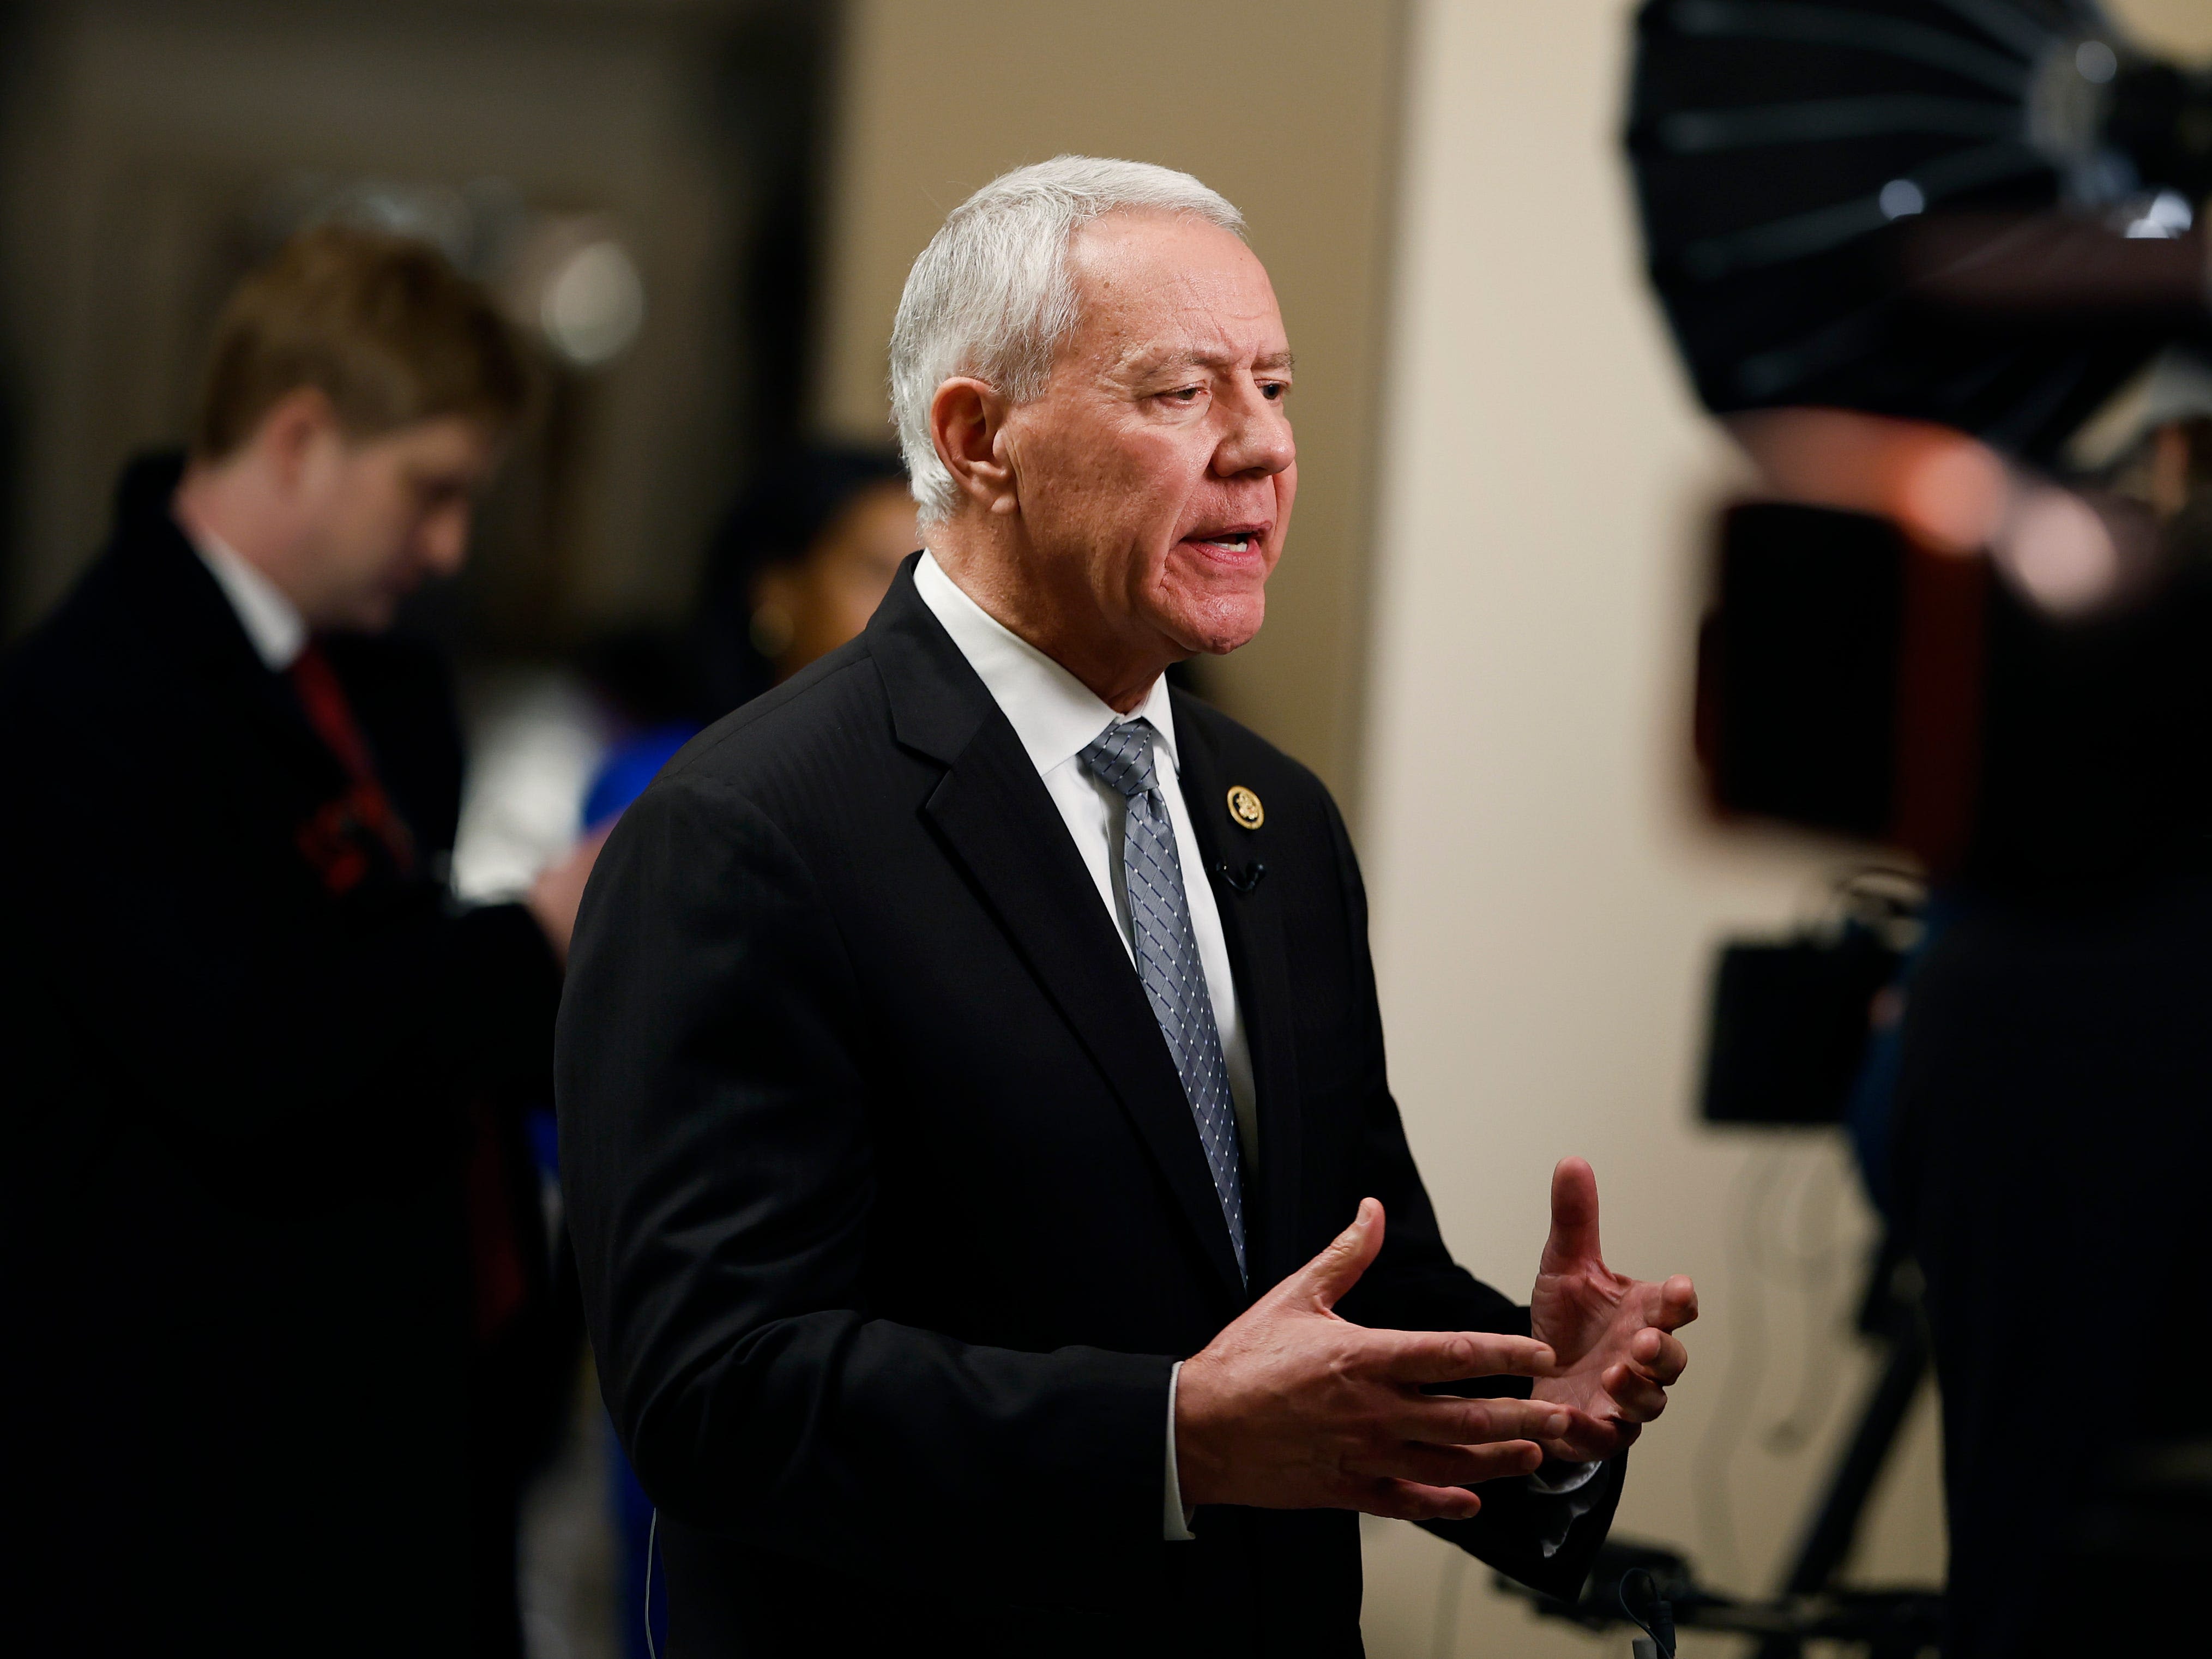 Ex-GOP Rep. Ken Buck says he wanted to leave Congress 'about three weeks' after he arrived: 'It took me a long time to figure out how to get out of this place'